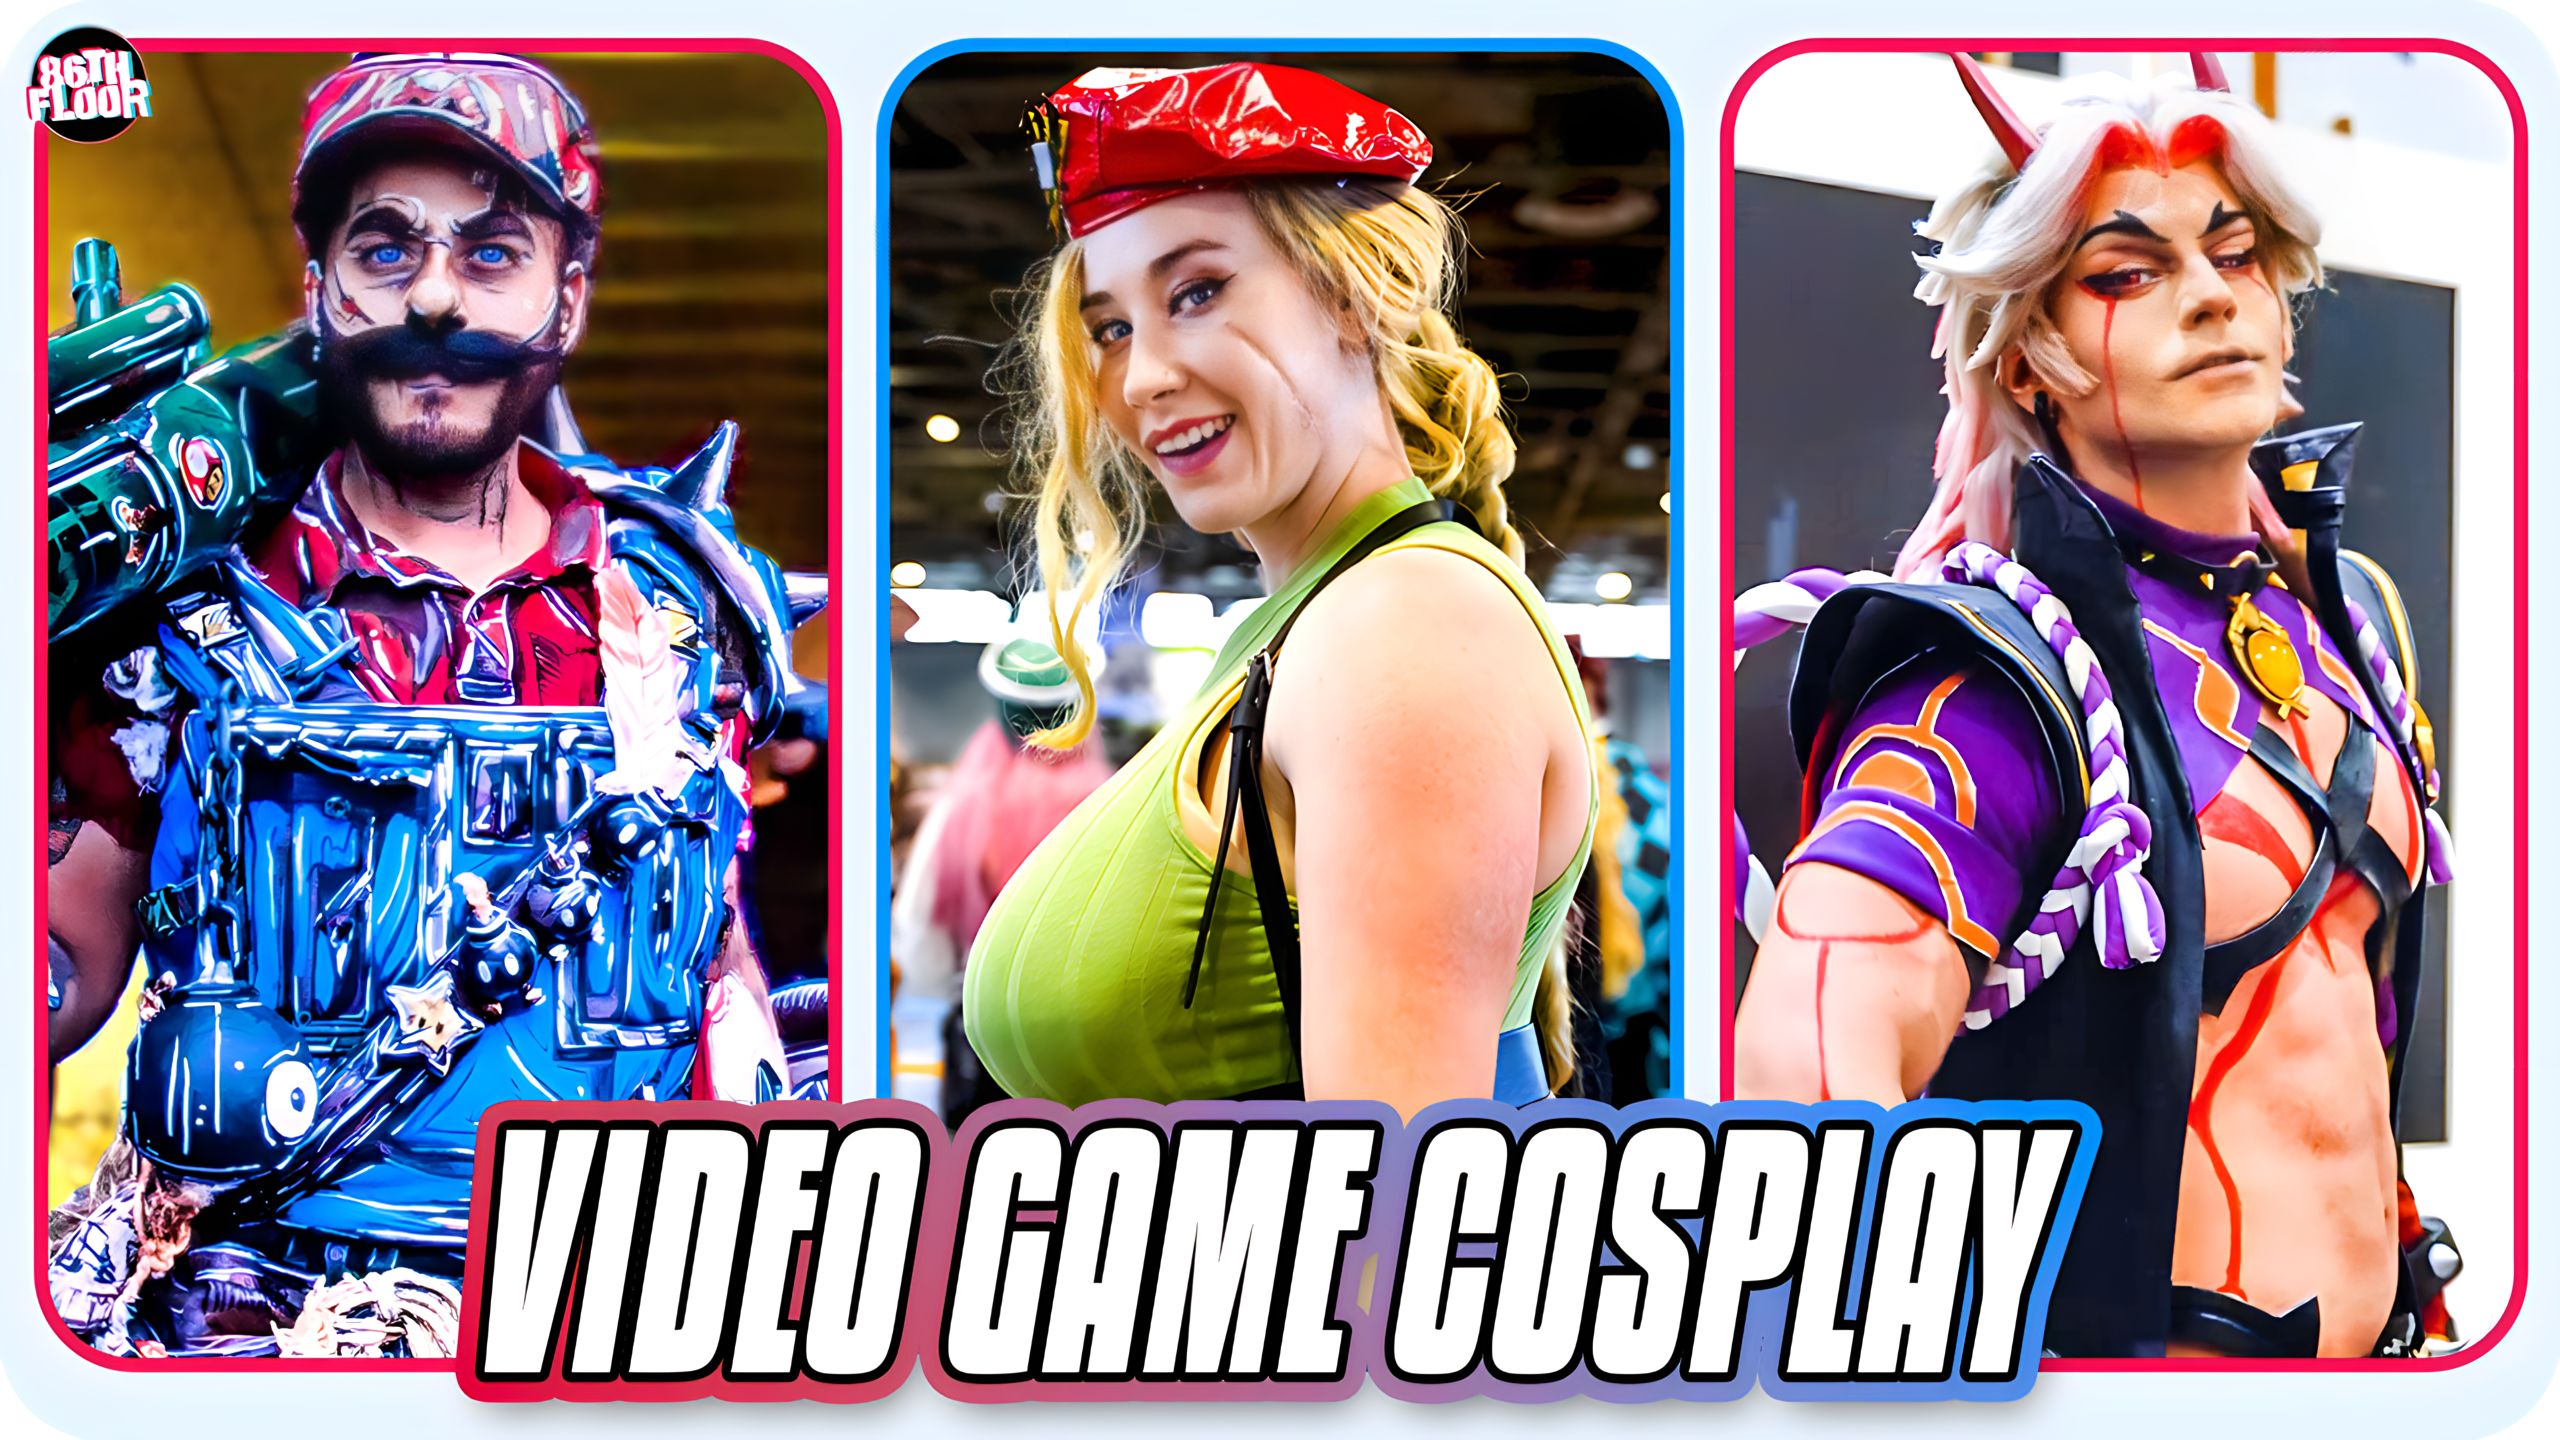 😲 Incredible Video Game Cosplay 2023 – Cosplay from Genshin Impact, Super Mario, Horizon, and more!